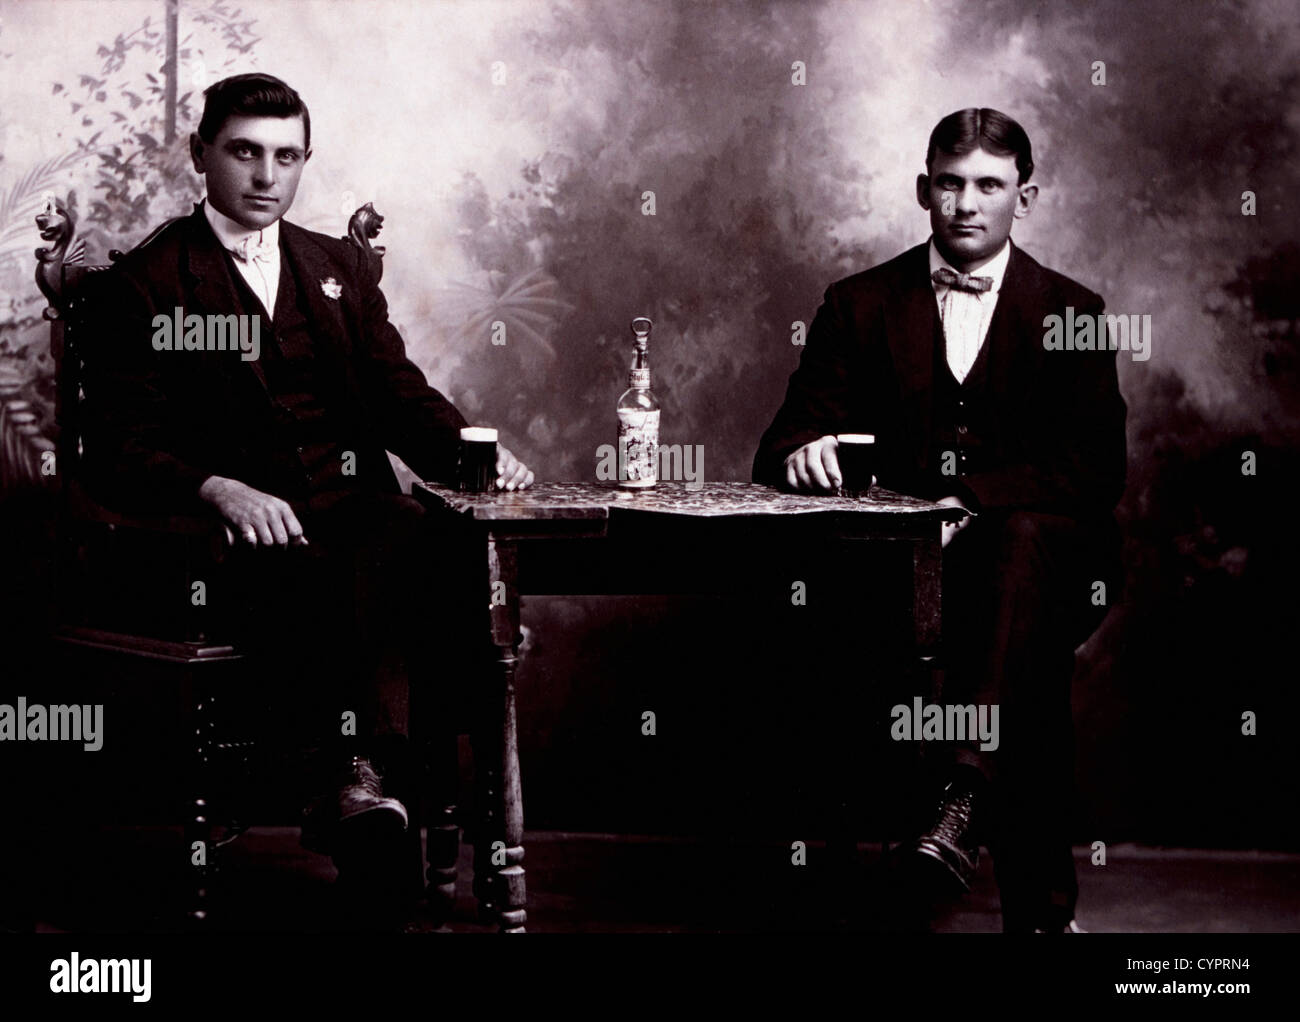 Two Men in Formal Attire Sitting at Table Drinking Beer, Circa 1900 Stock Photo